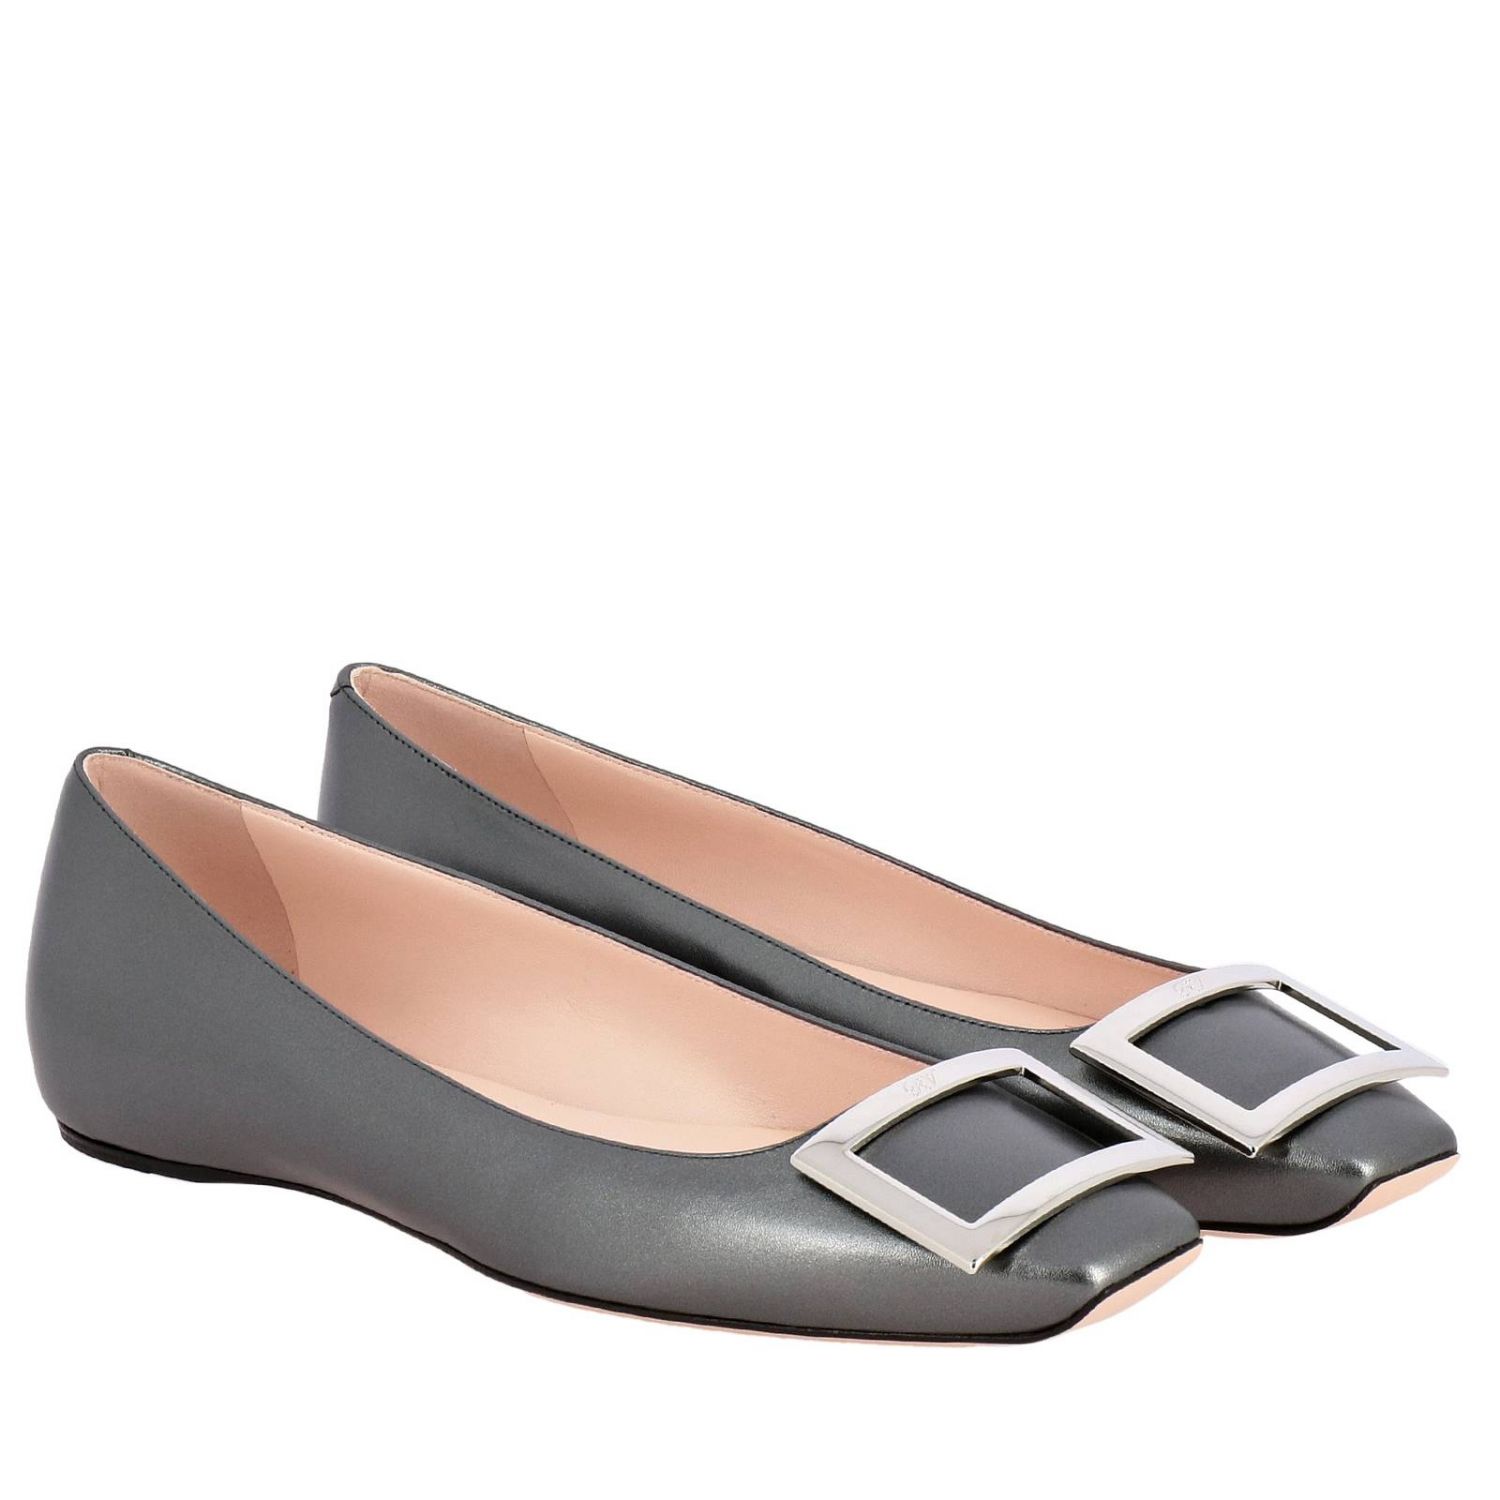 ROGER VIVIER: Trompette ballet flats in laminated leather with RV metal